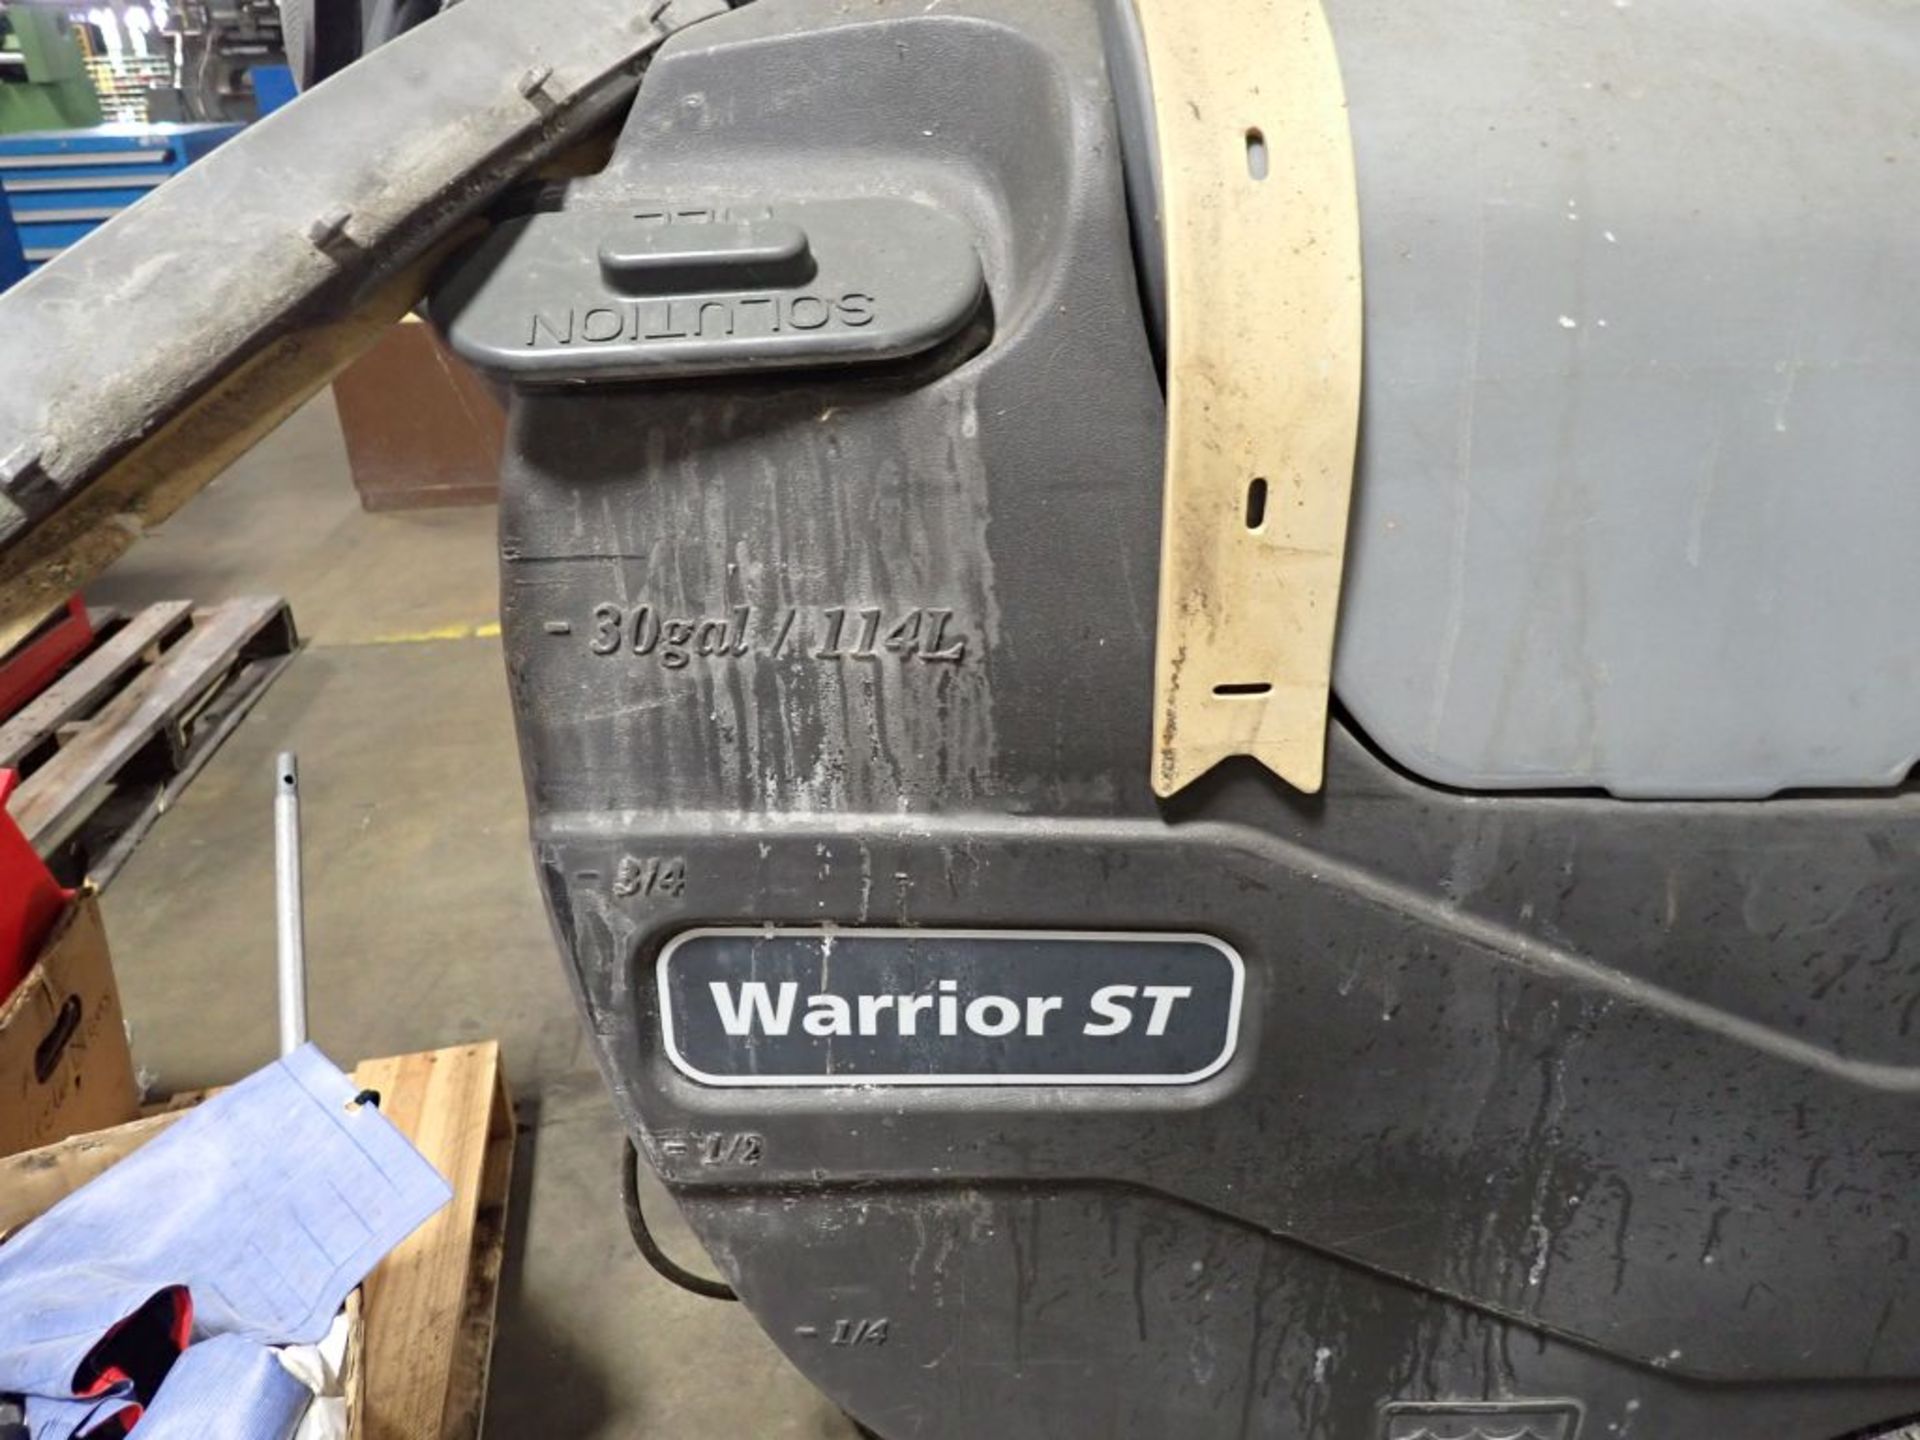 Advance Warrior ST Floor Sweeper | Tag: 241477 | Limited Forklift Assistance Available - $10.00 - Image 3 of 4